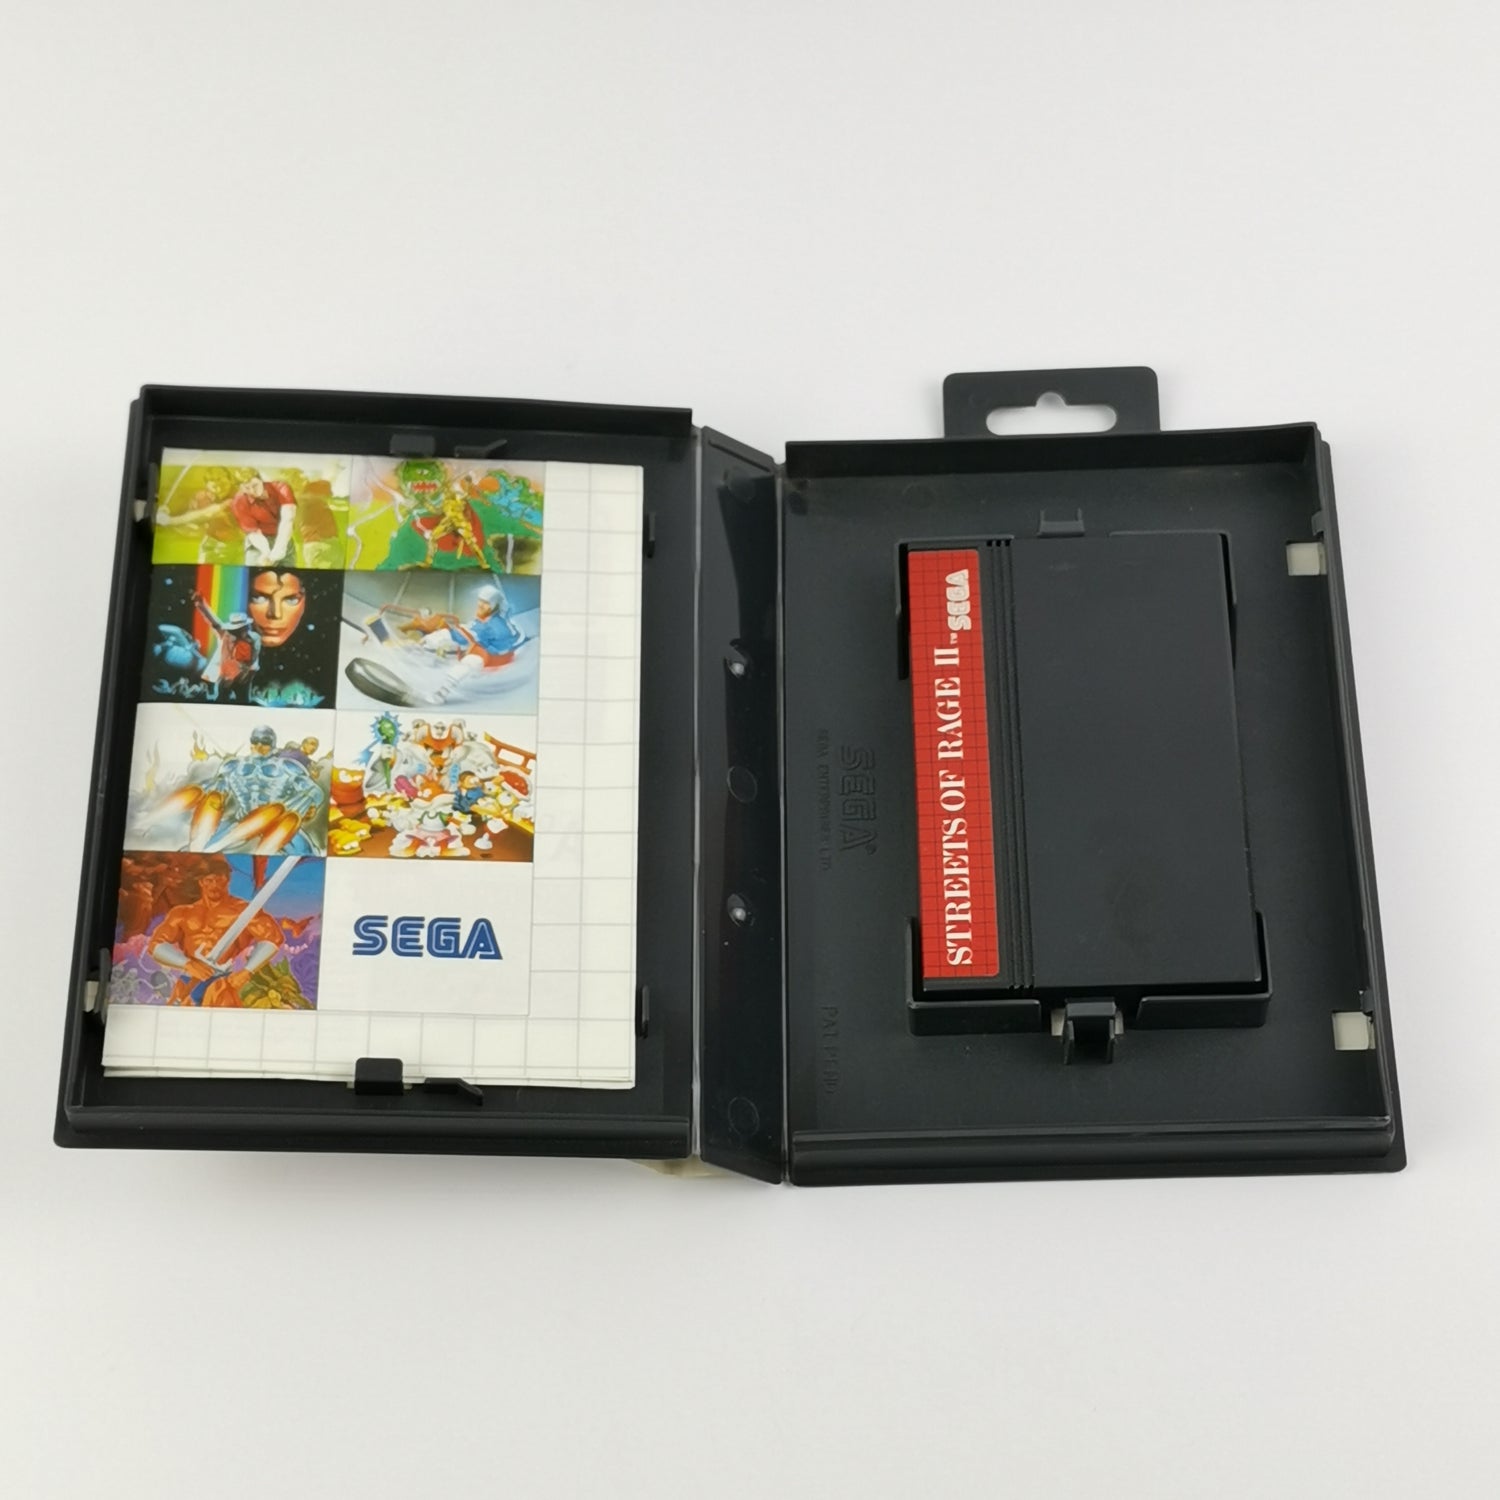 Sega Master System game: Streets of Rage II - original packaging without instructions PAL cartridge